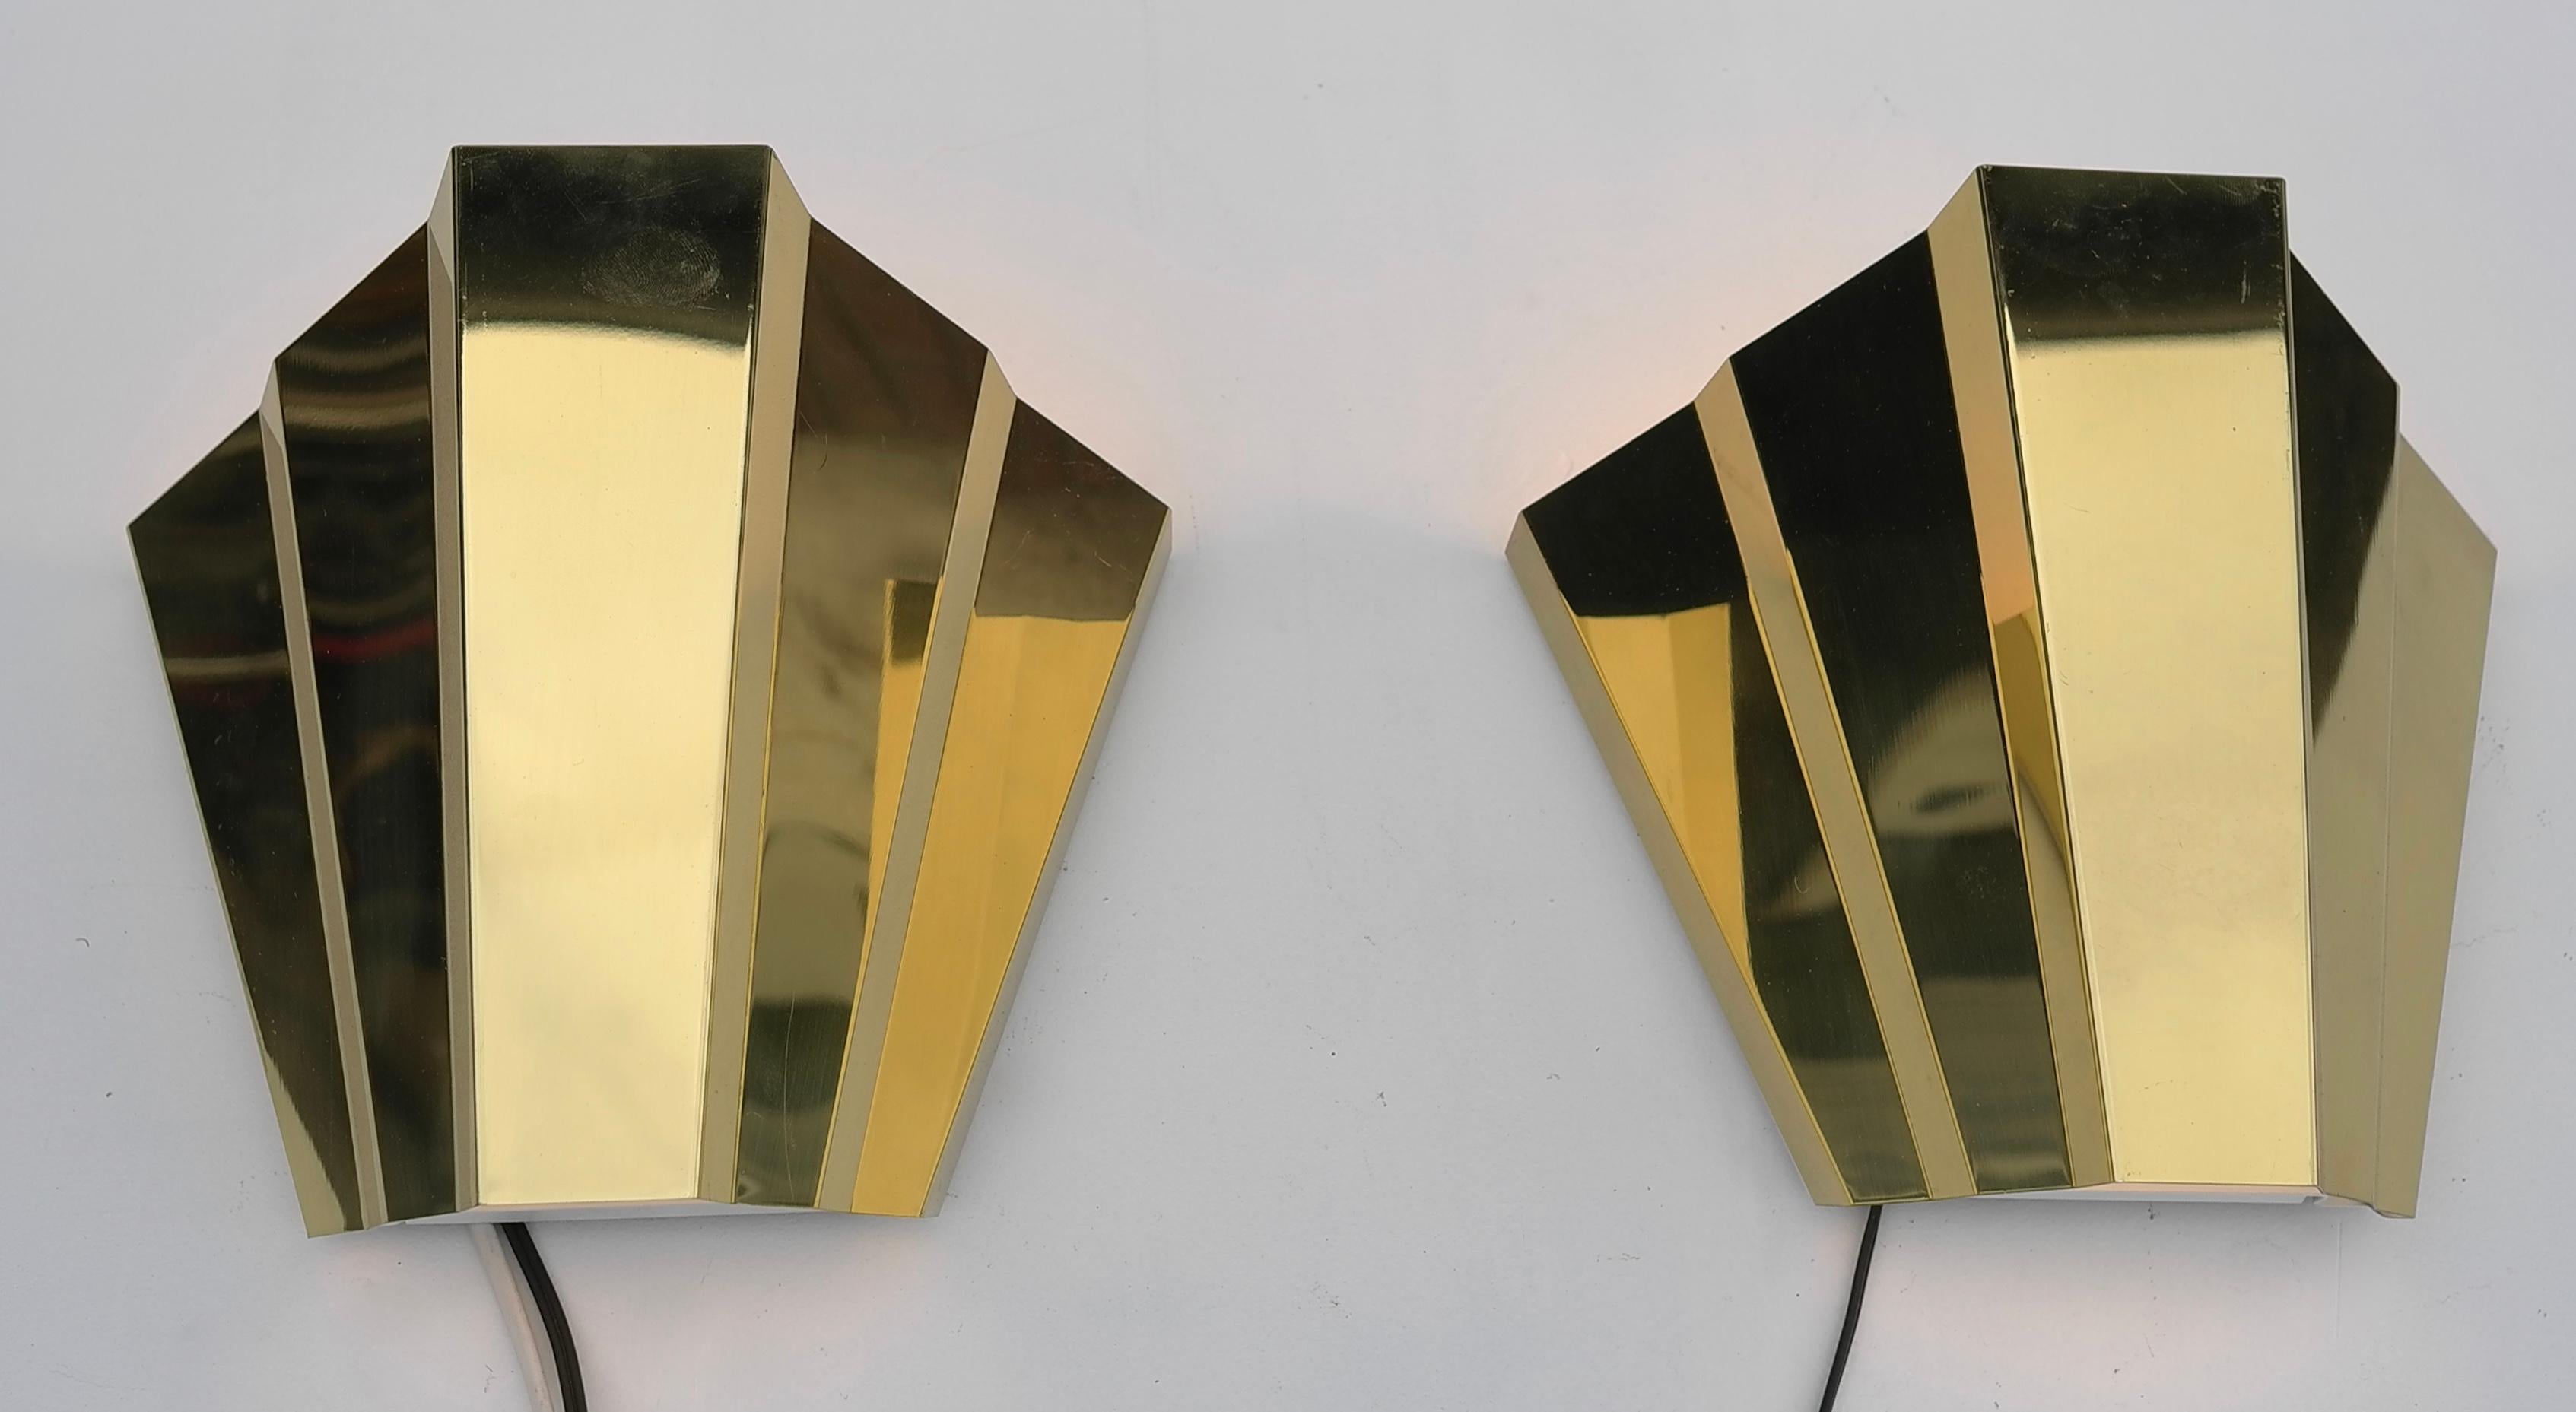 Pair of Monumental 'Diamond' wall lamps in style of Gio Ponti.